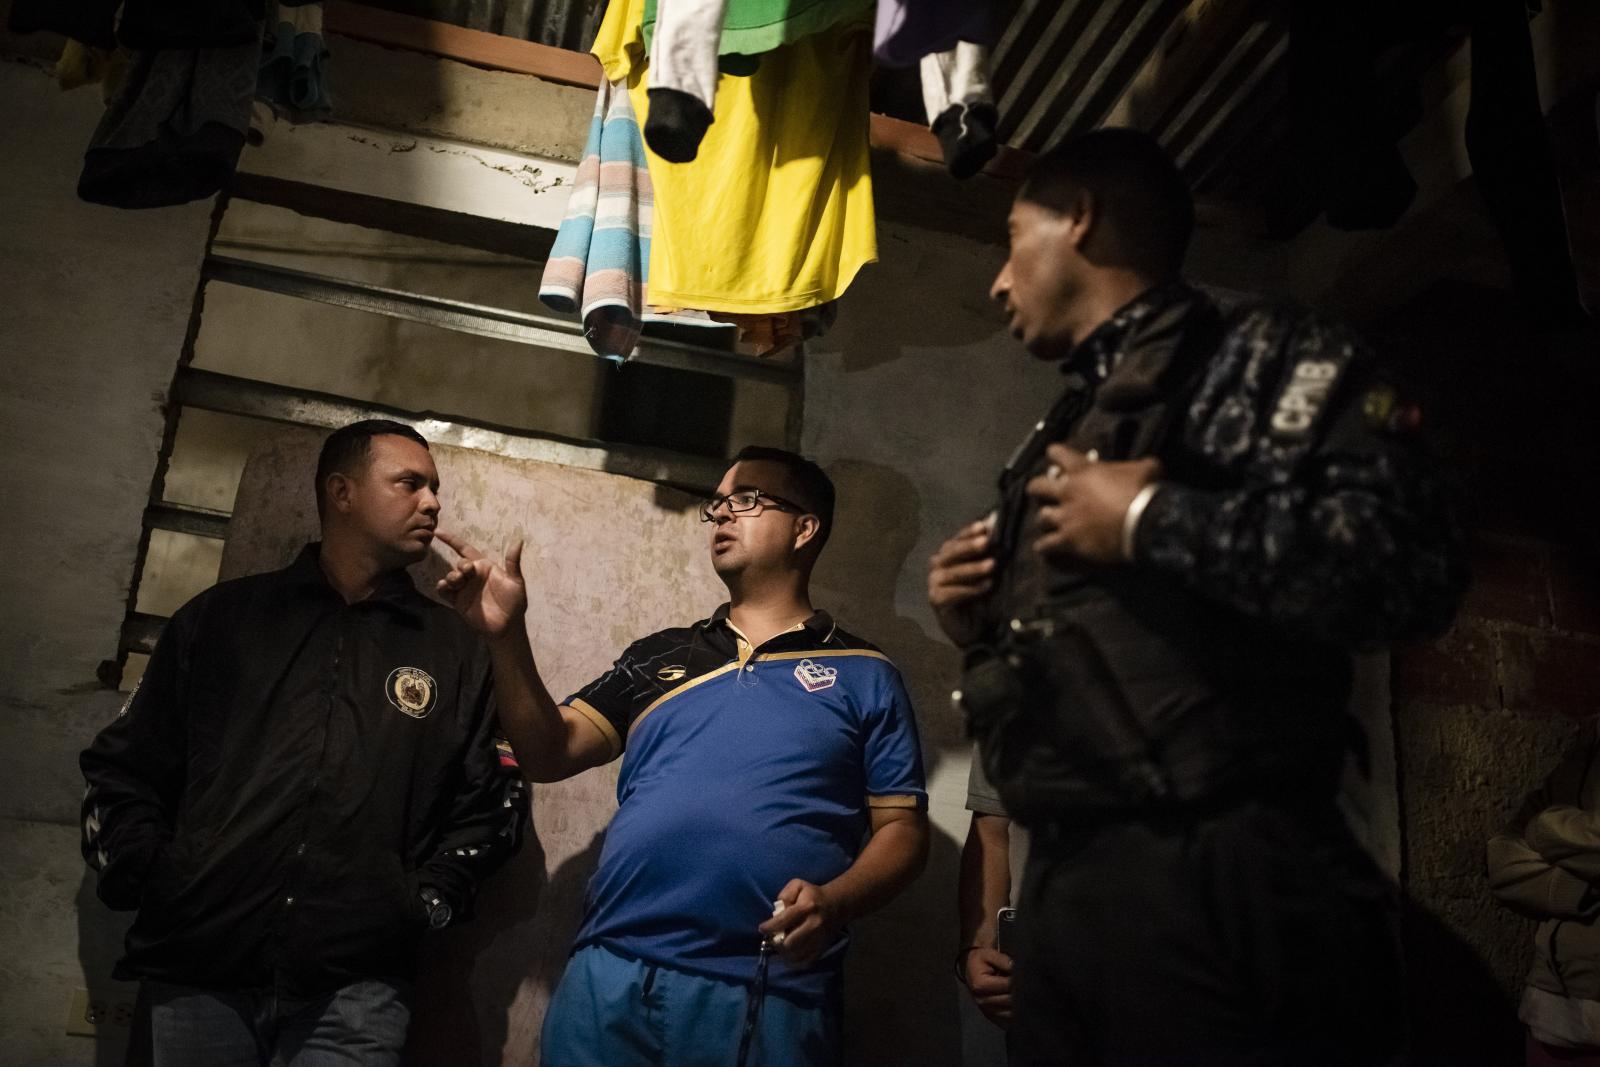 Venezuela / Between violence and justice - Witness gives statements to police about the murder of a...